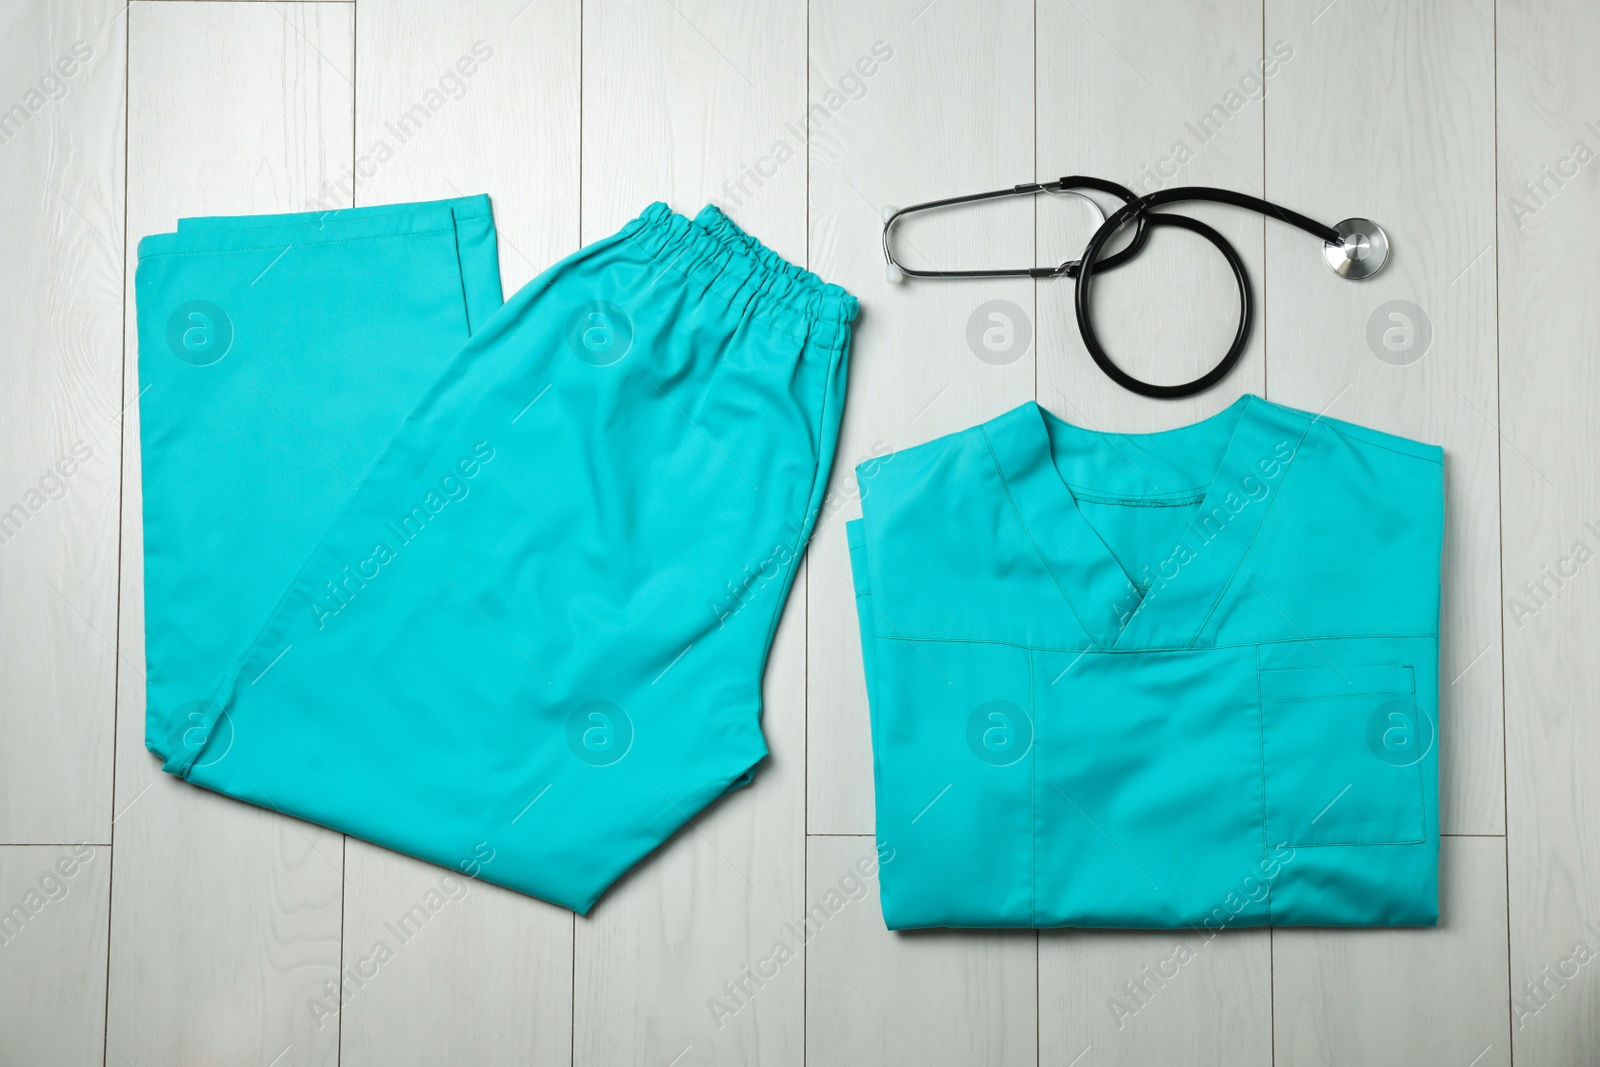 Photo of Clean scrubs and stethoscope on wooden background, top view. Medical objects